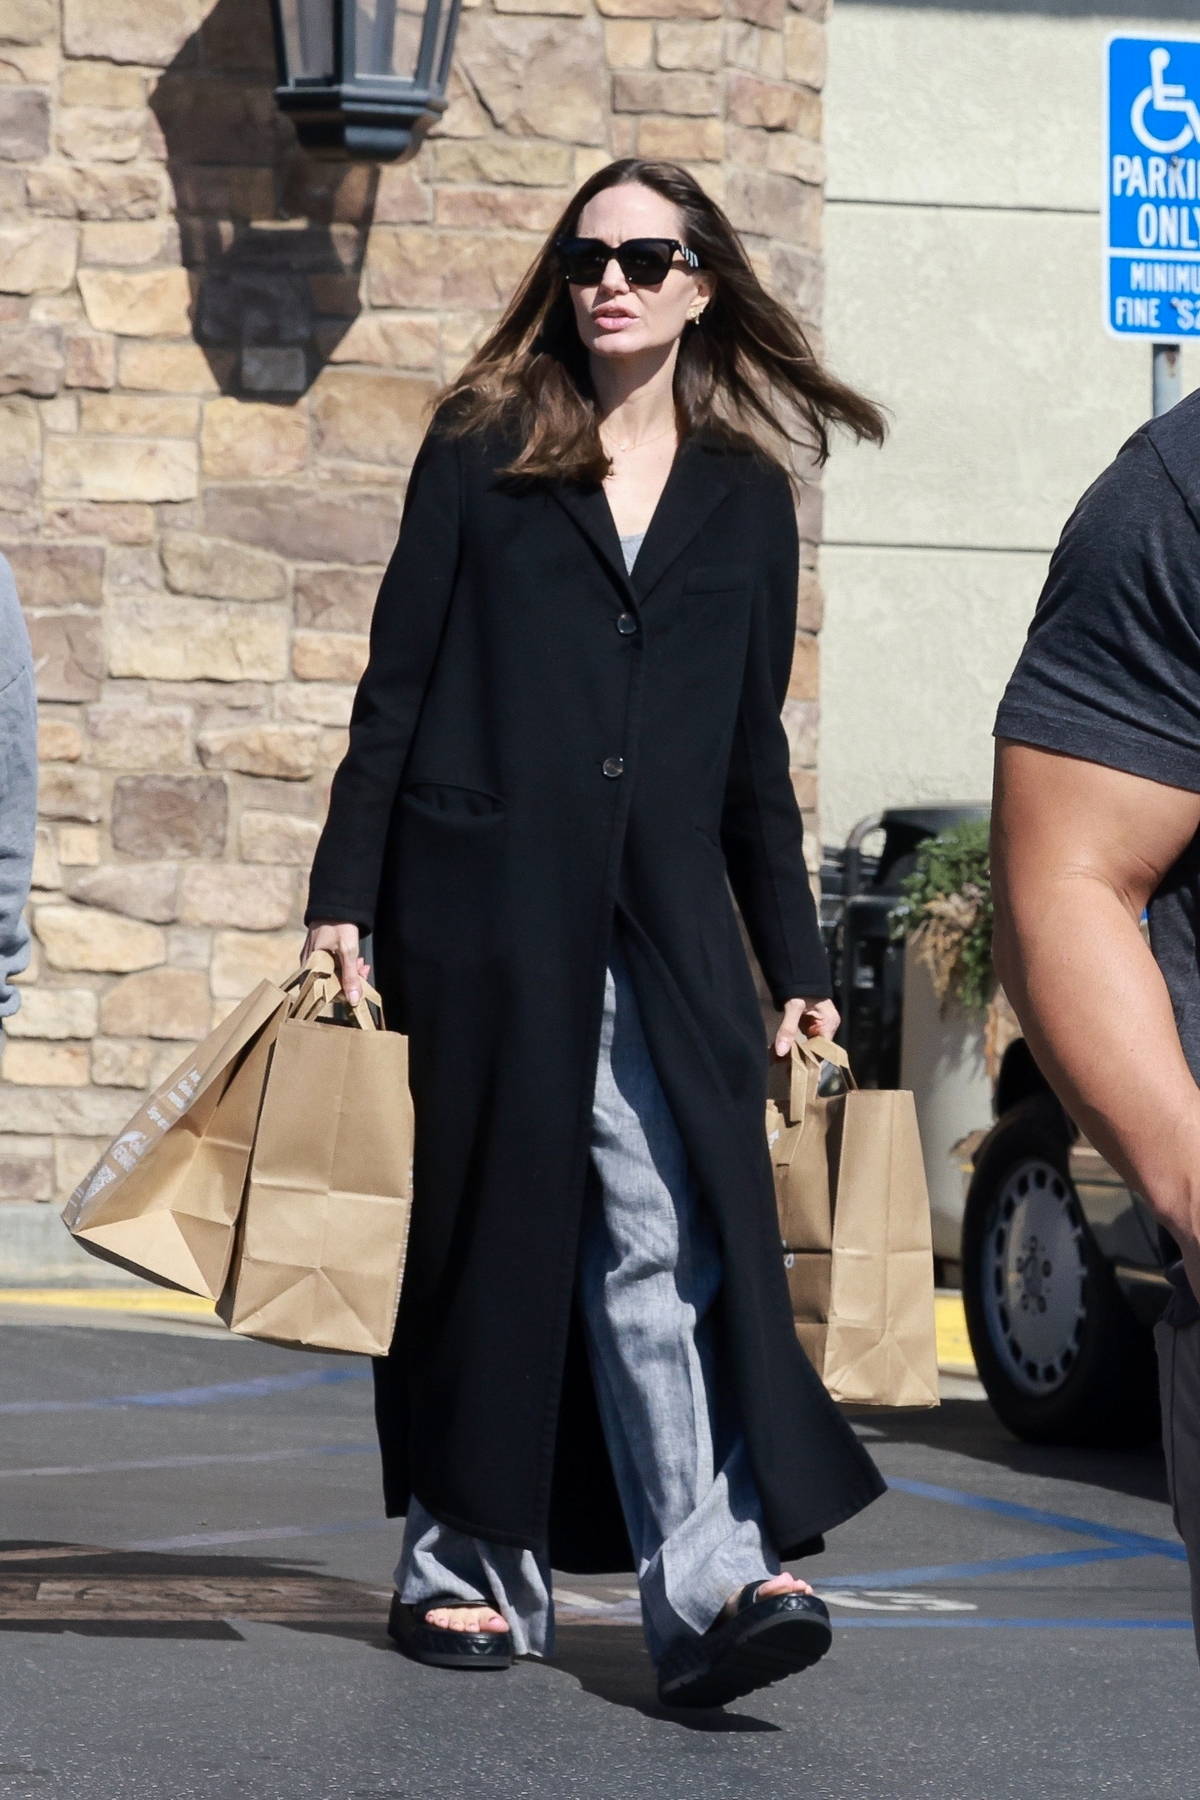 Angelina Jolie in a Chic Long Black Overcoat and Carrying a Dior